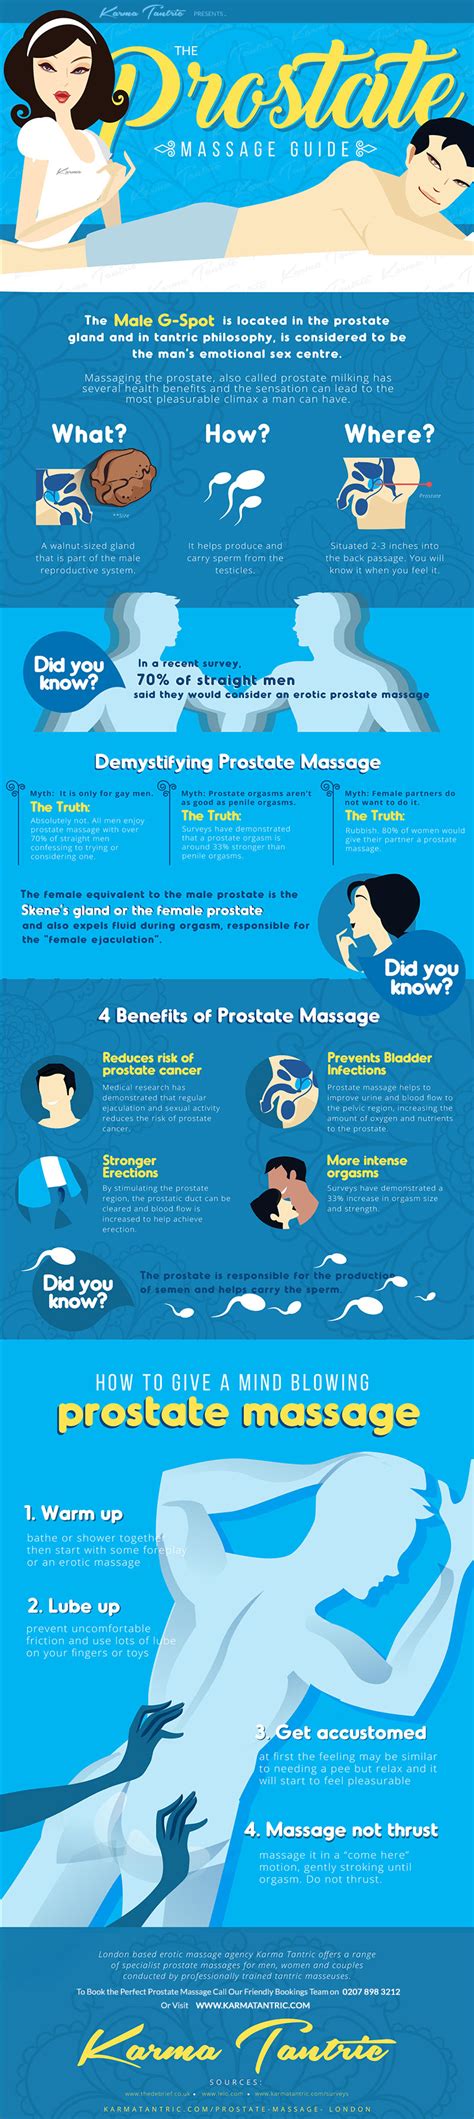 Prostate Orgasm 35 Tips Techniques Positions Benefits And More